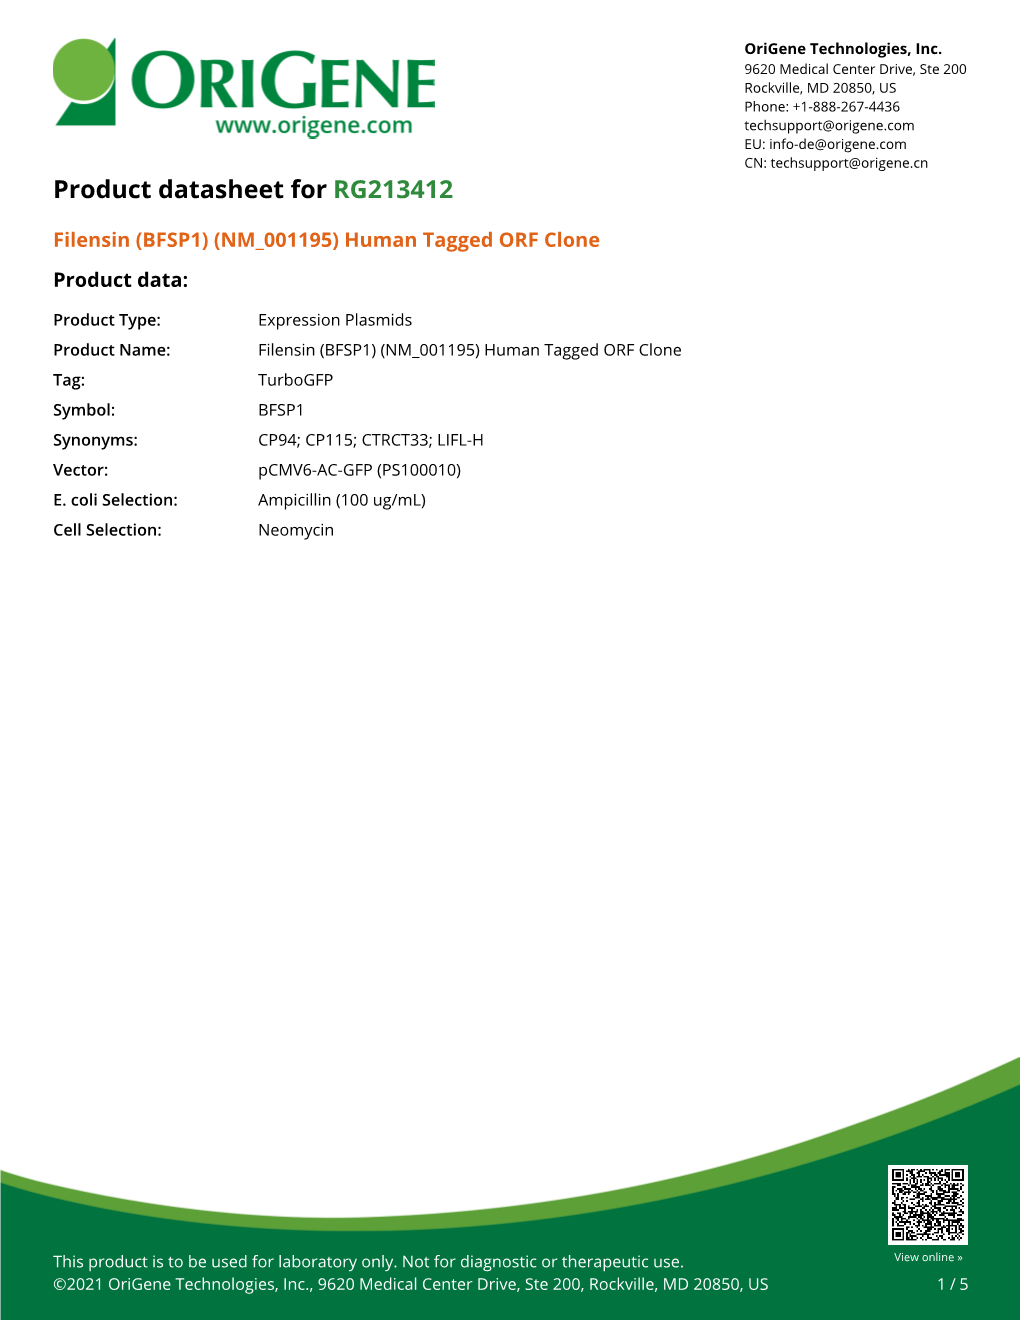 Filensin (BFSP1) (NM 001195) Human Tagged ORF Clone Product Data